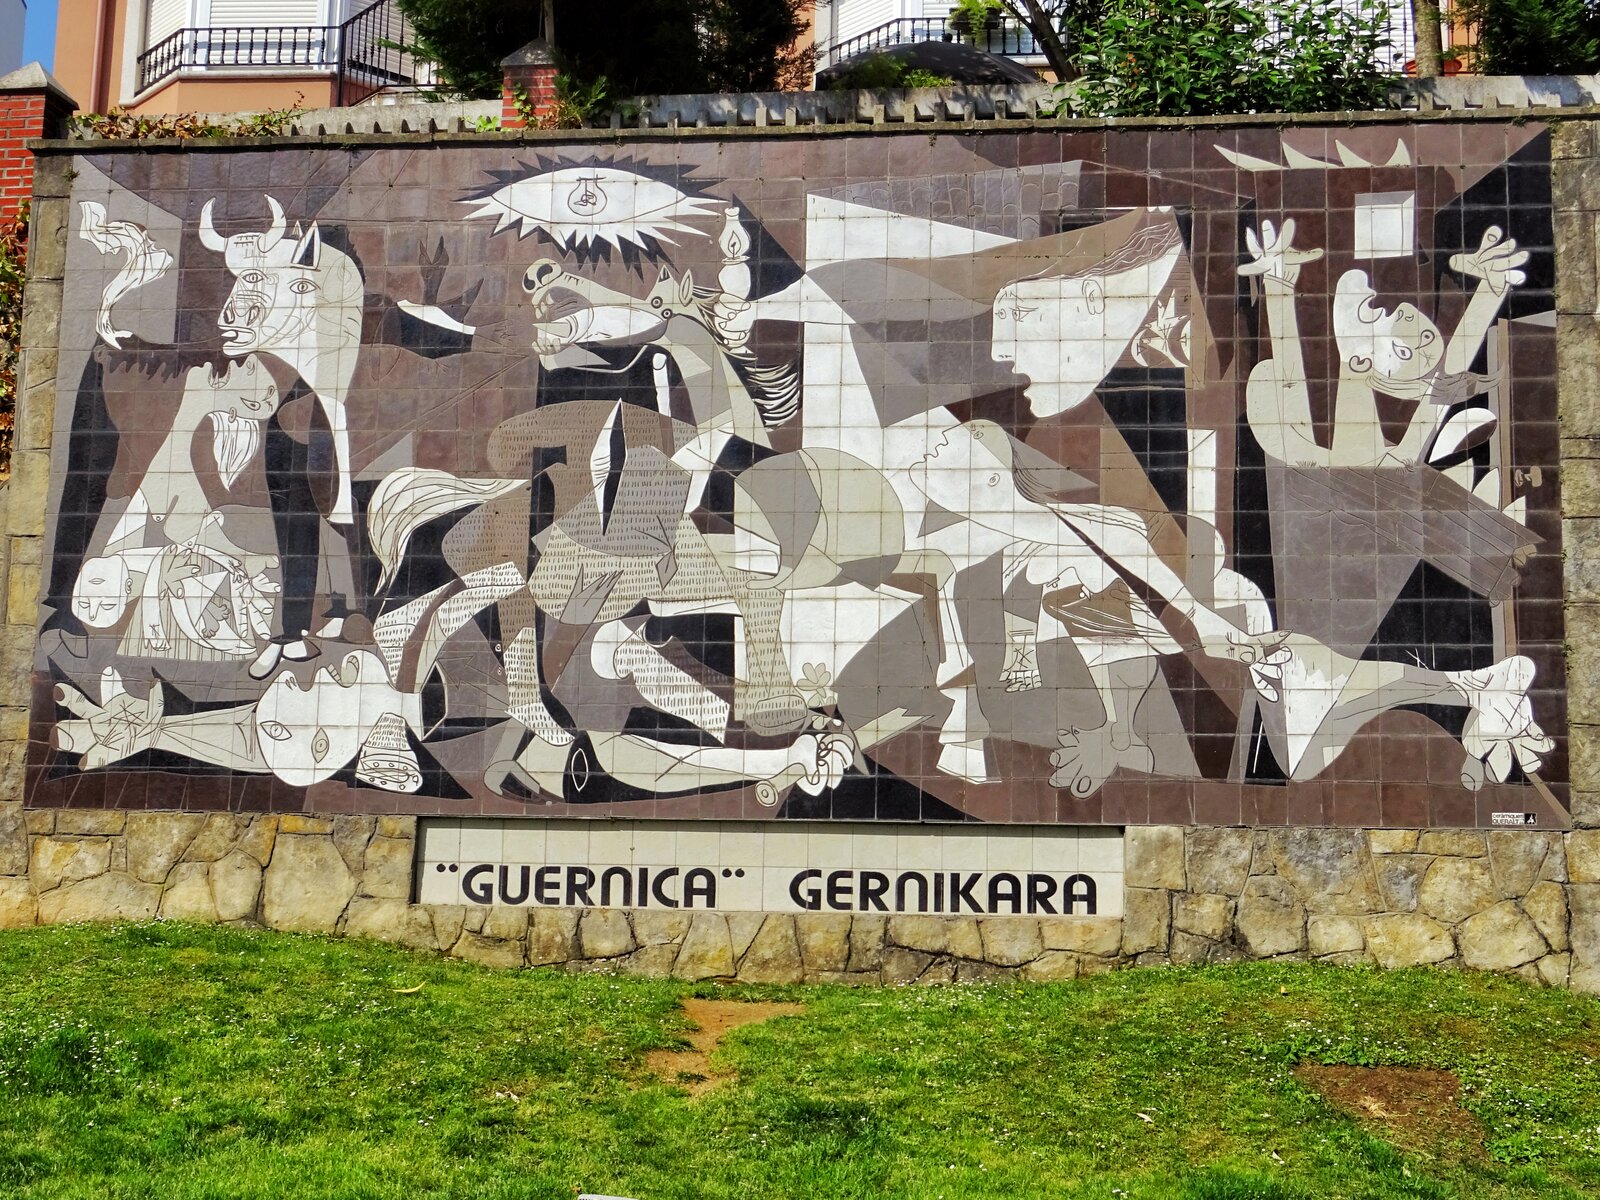 Guernica, the historical